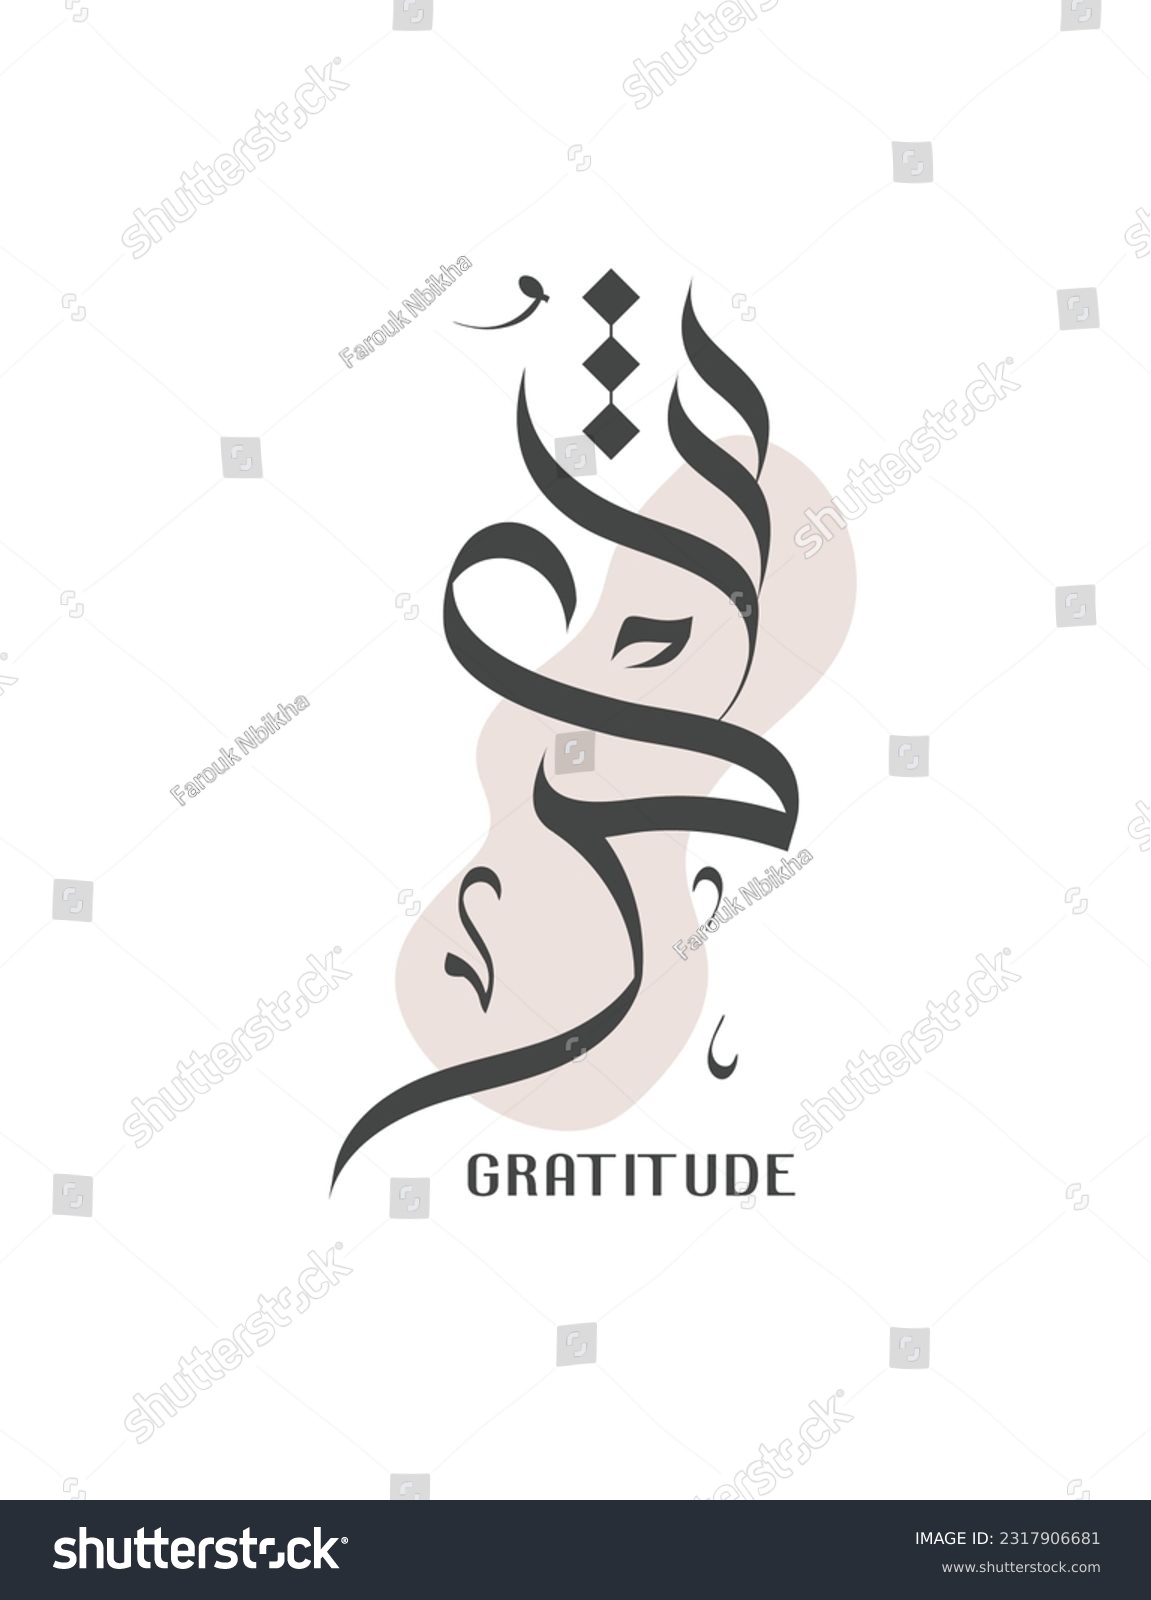 SVG of Gratitude Arabic Calligraphy Shukr, Shukr is an Arabic term denoting thankfulness, gratitude or acknowledgment by humans. Perfect for Modern, Contemporary, Classic, and Minimalist Décor. svg